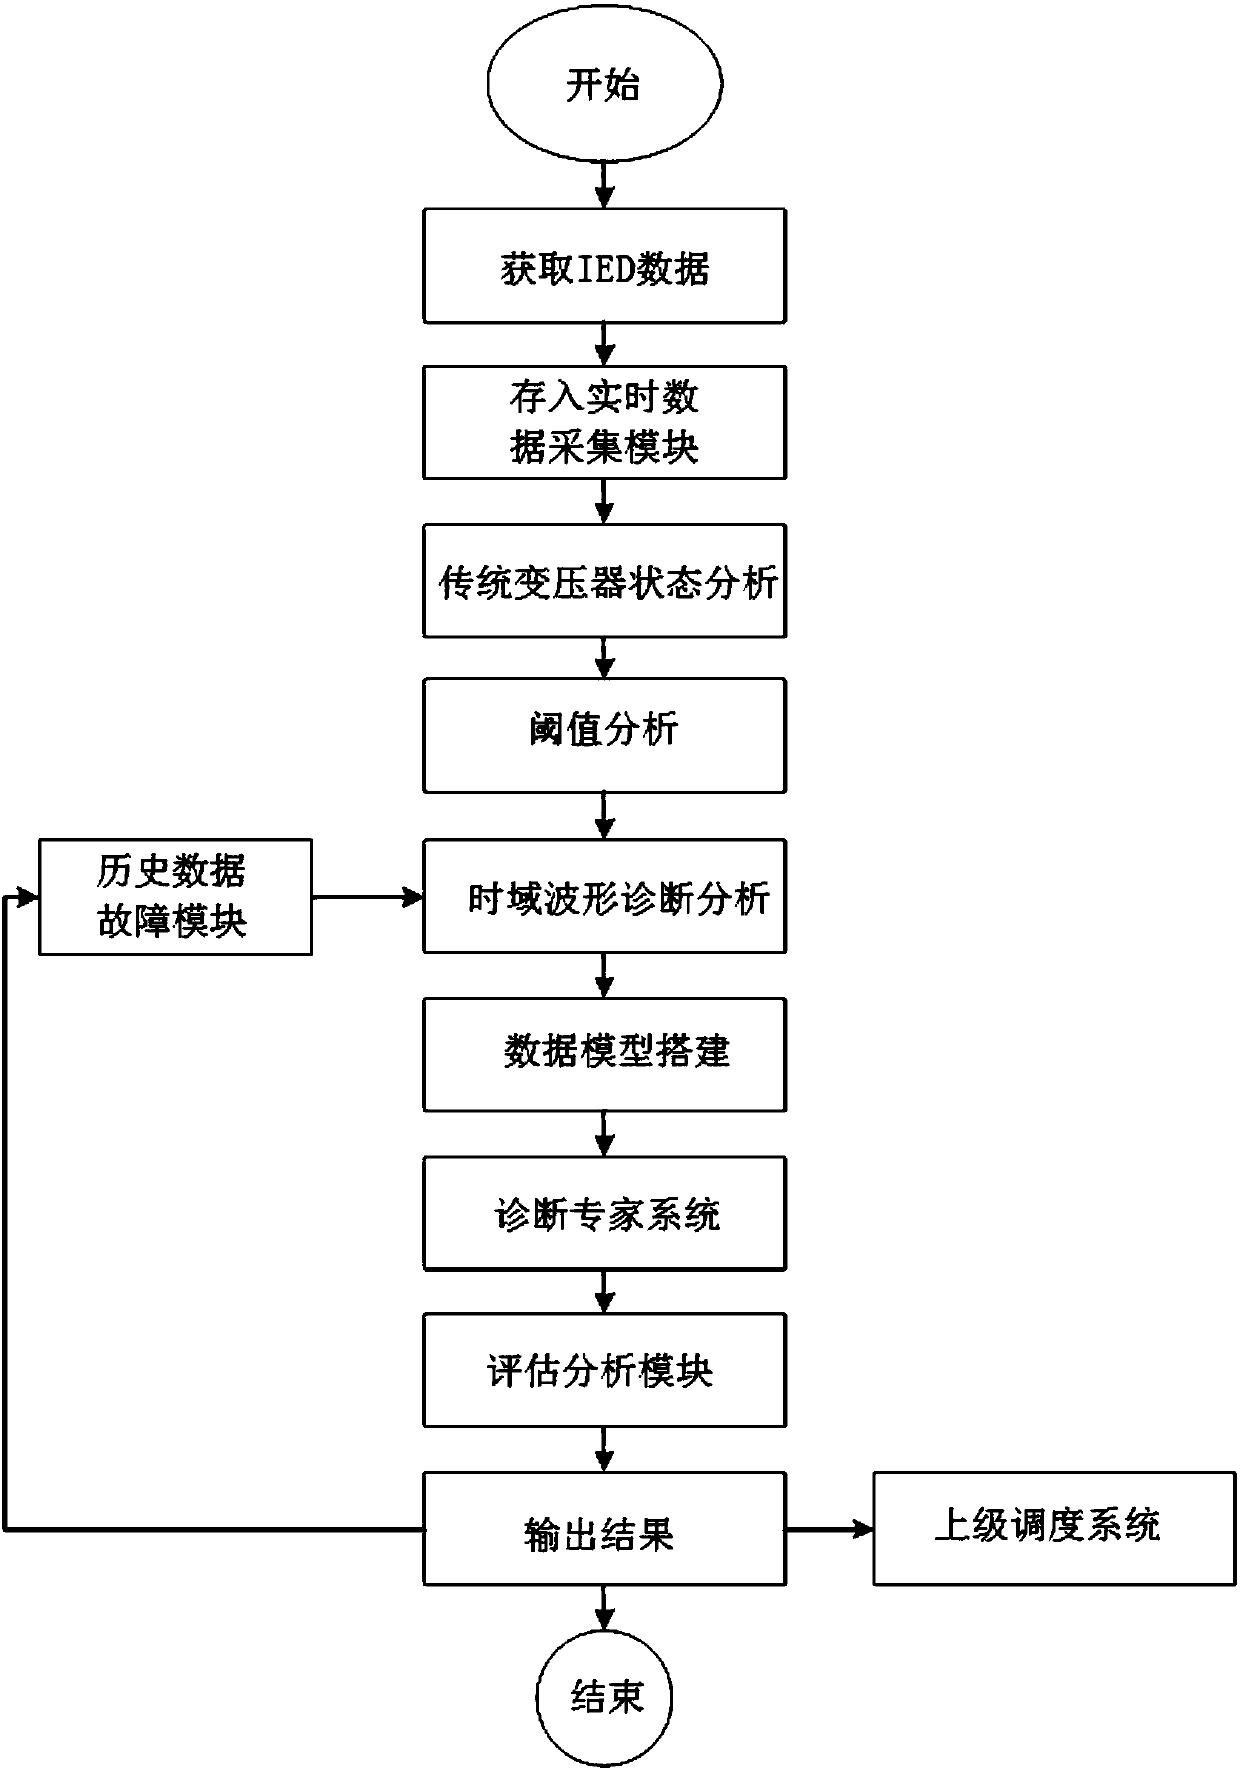 Online transformer state evaluation and analysis method based on artificial intelligence technology